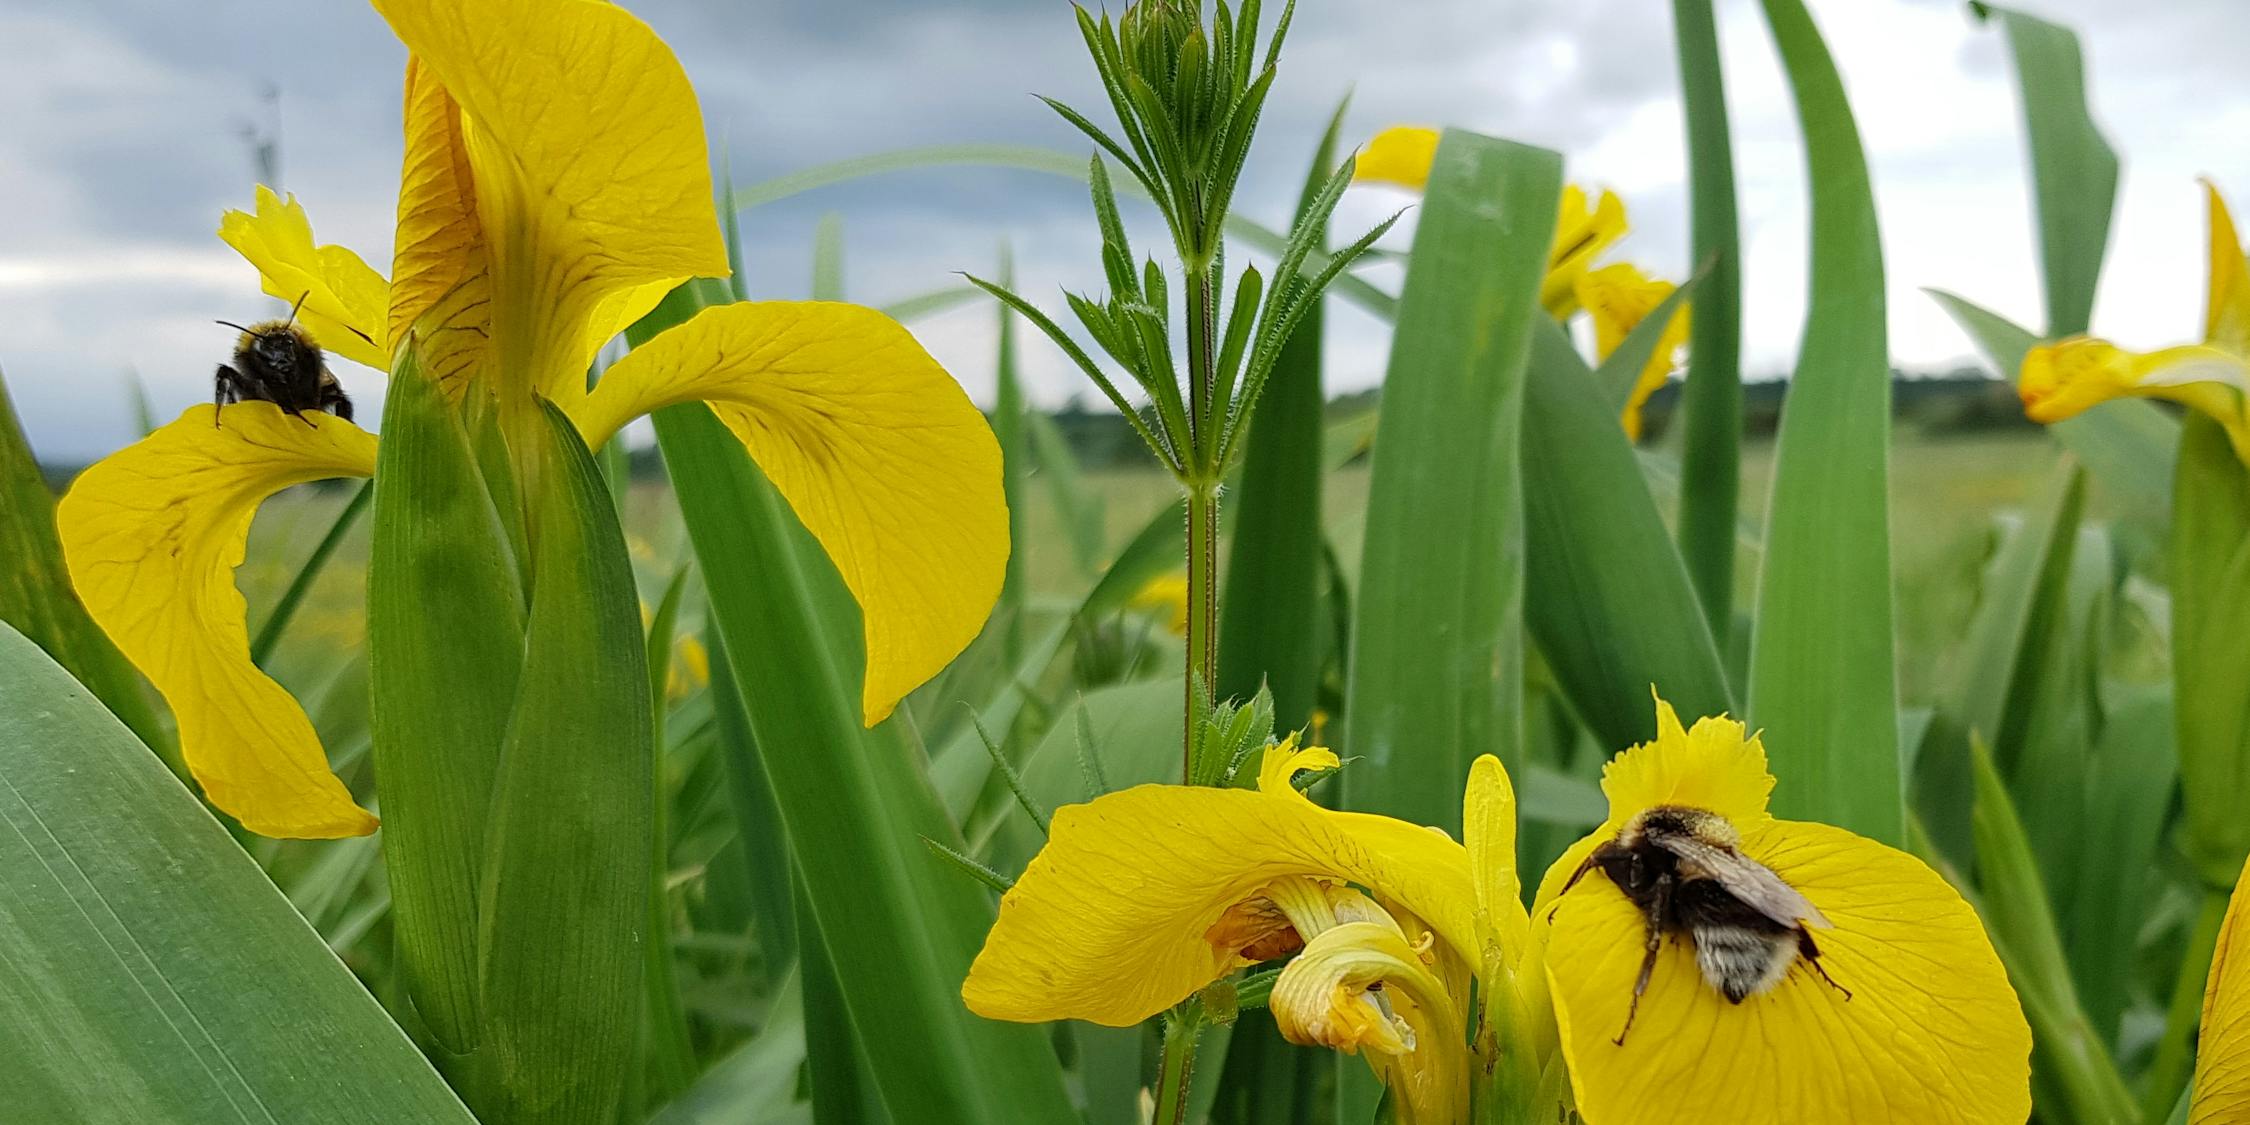 Bumble bees on yellow Iris flowers